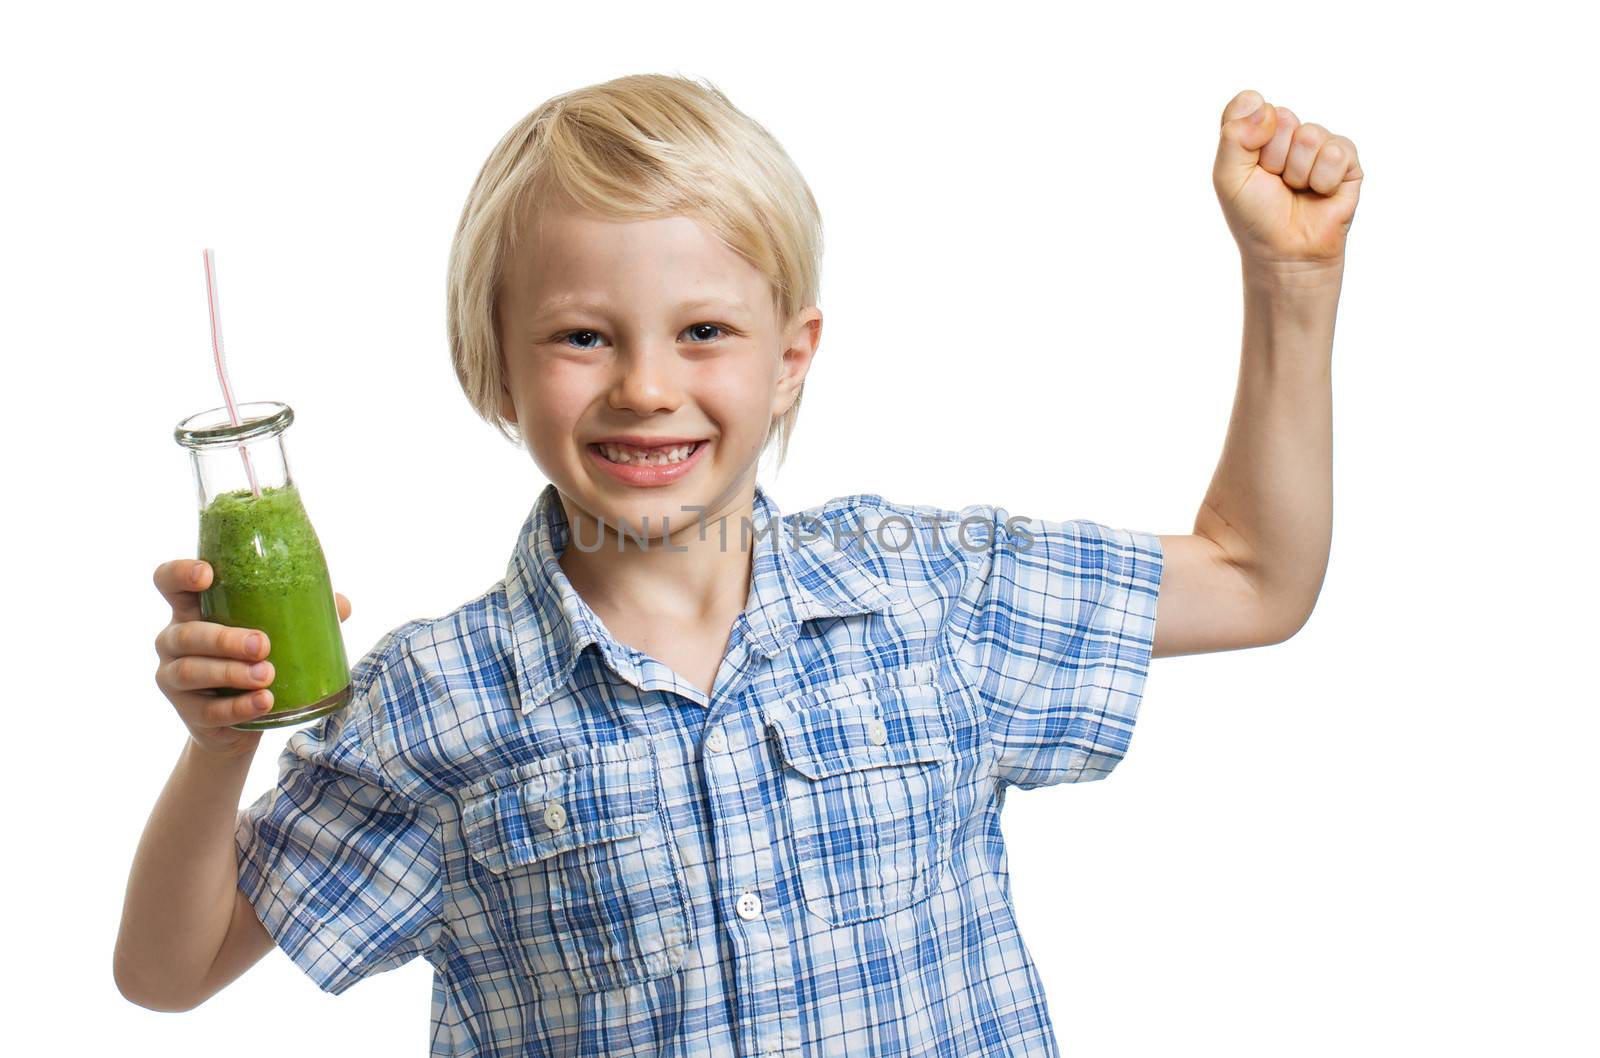 A healthy cute boy holding a green smoothie or jucie and flexing his muscles. Isolated on white.